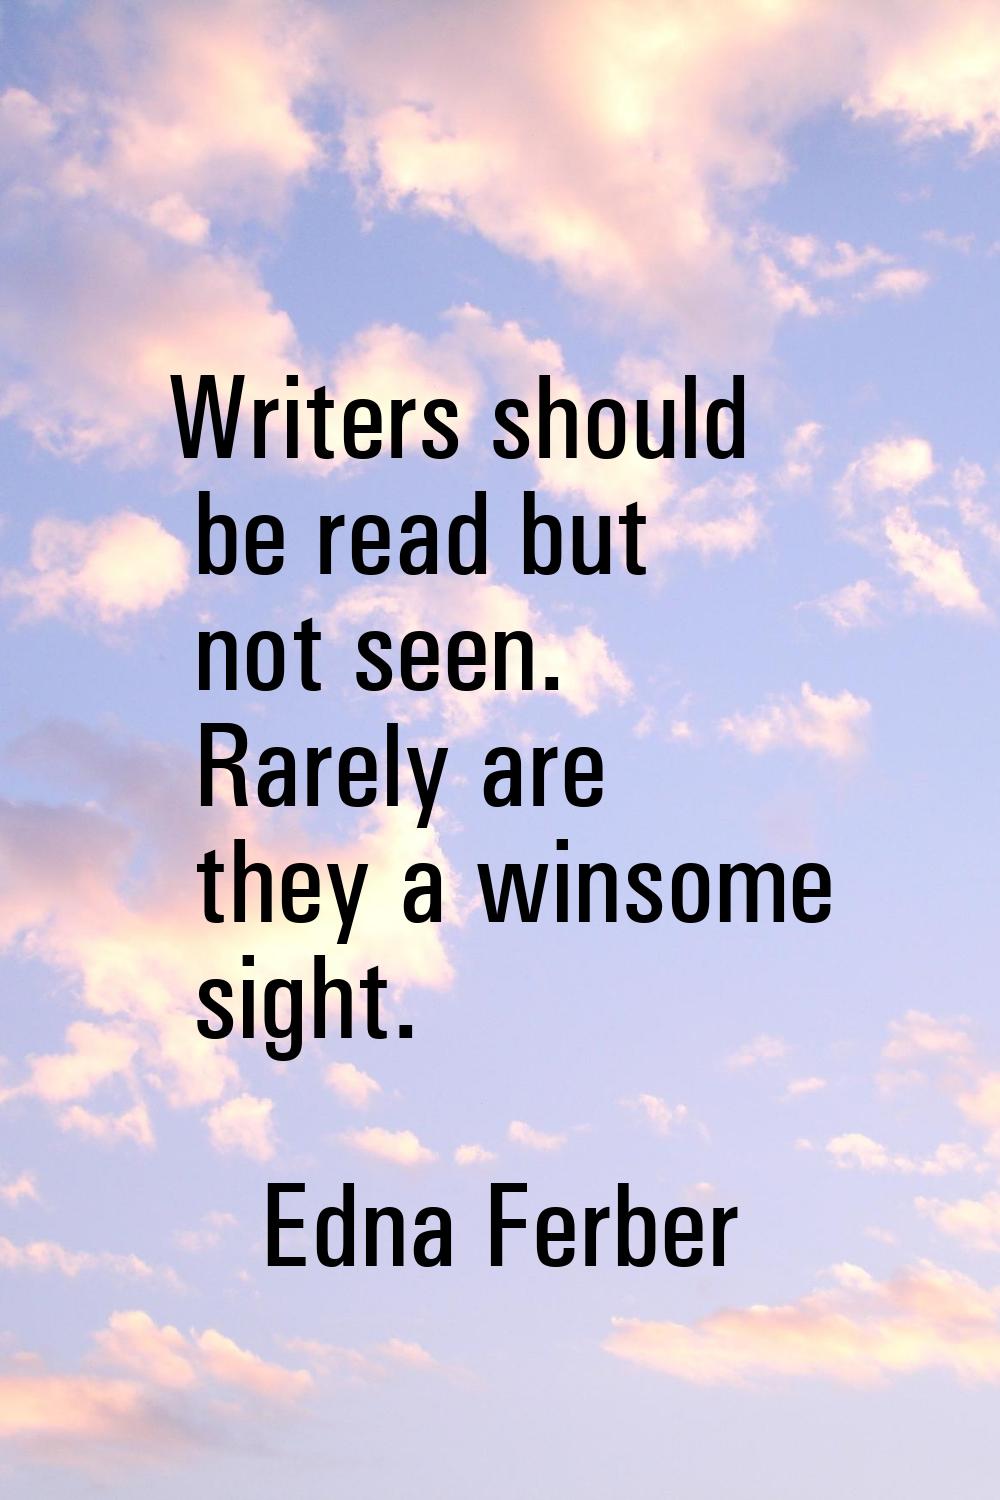 Writers should be read but not seen. Rarely are they a winsome sight.